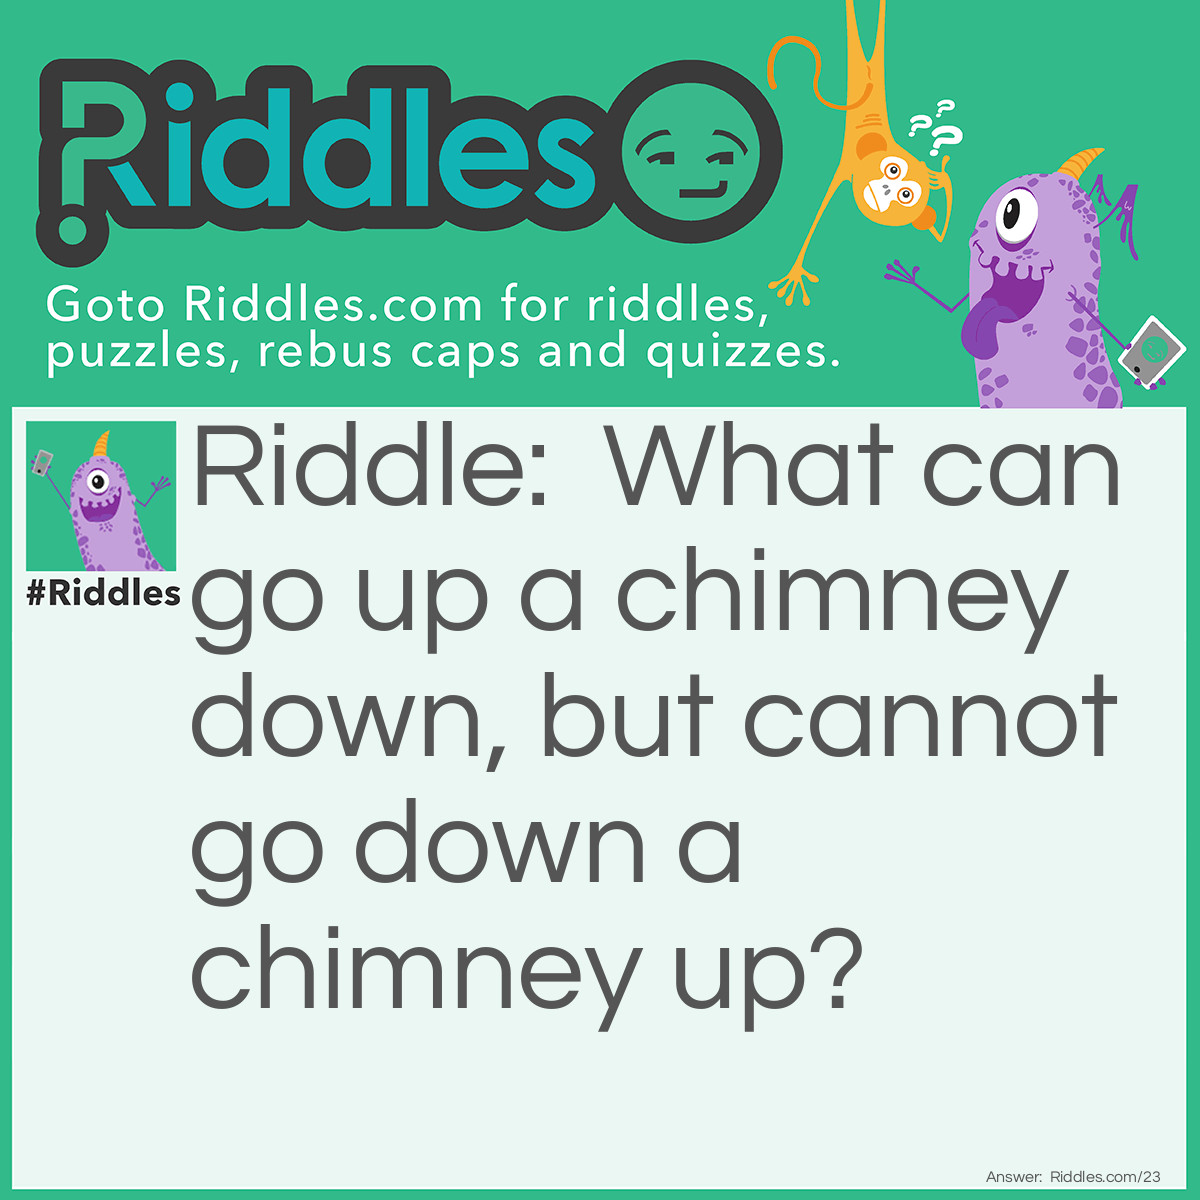 Riddle: What can go up a chimney down, but cannot go down a chimney up? Answer: An umbrella.